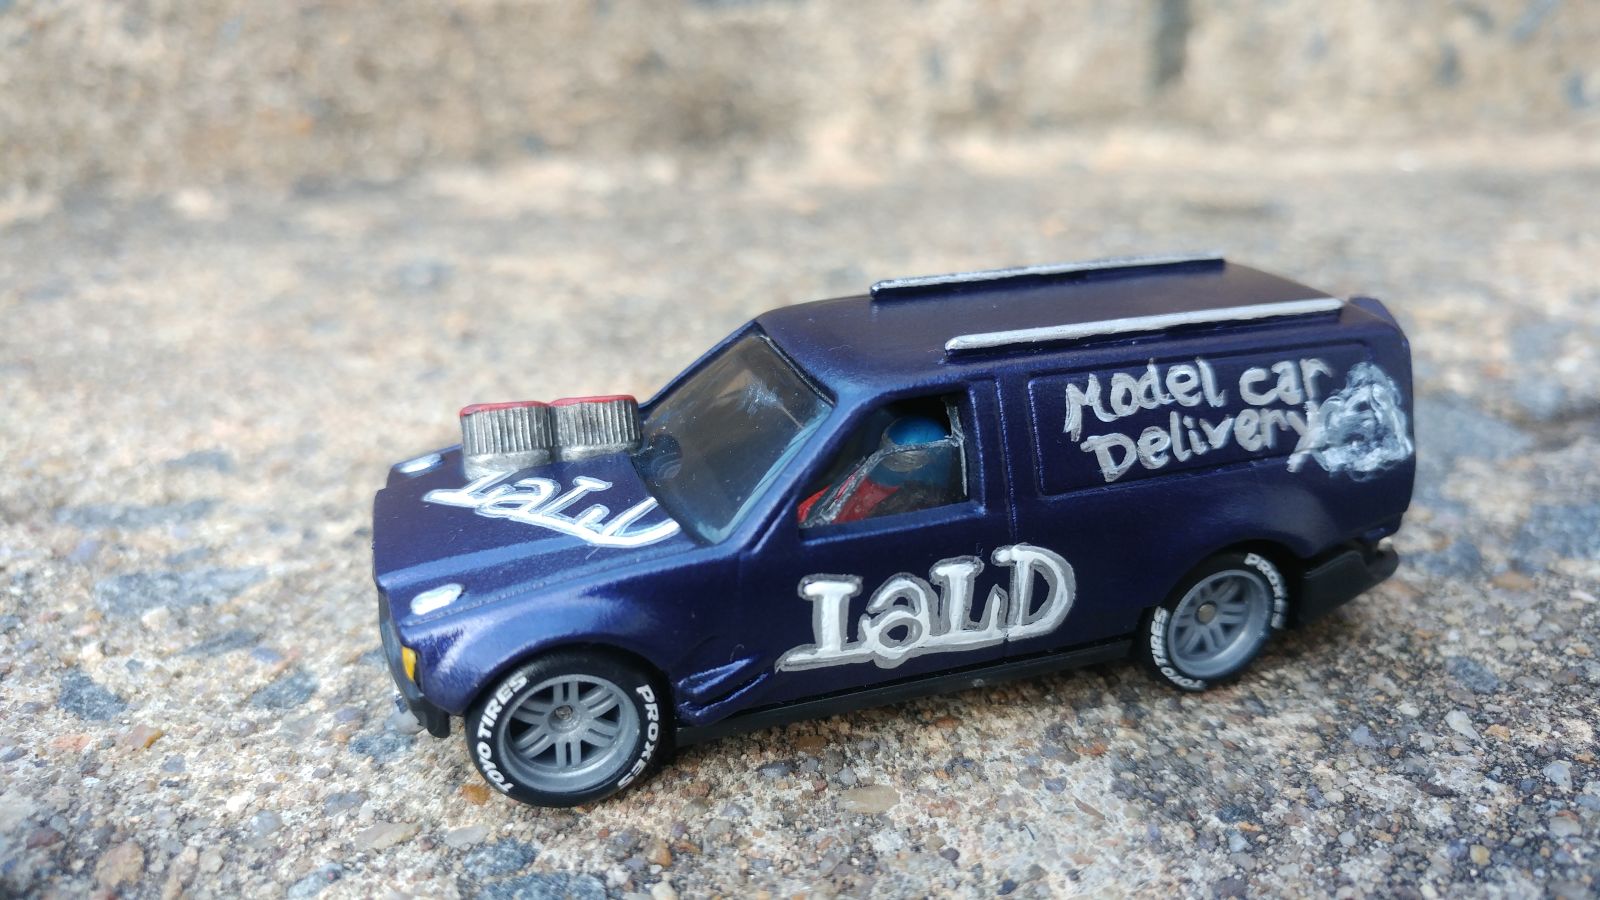 Illustration for article titled August Fantasy Custom Build-Off: LaLD Diecast Delivery